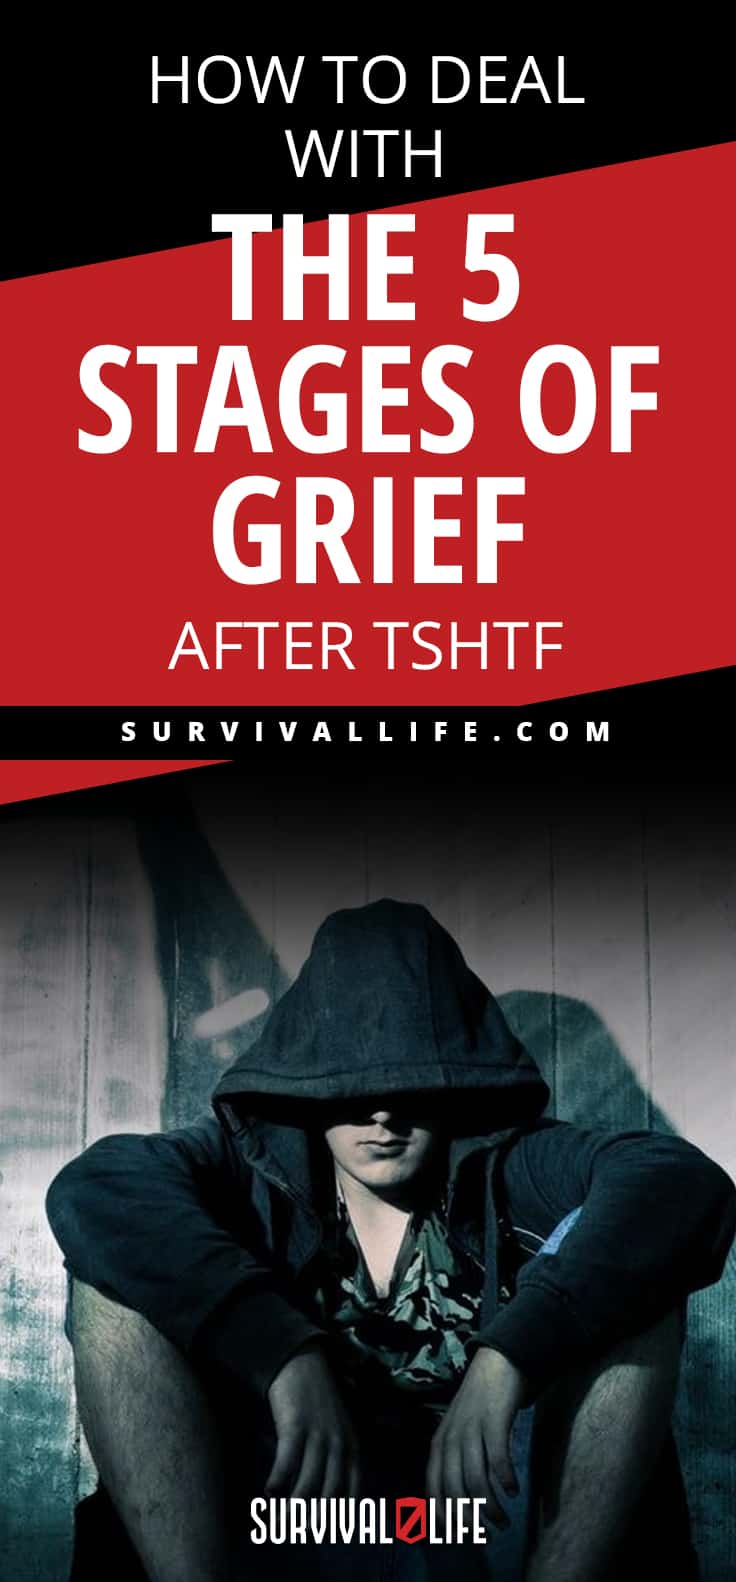 How to Deal With The 5 Stages Of Grief After TSHTF